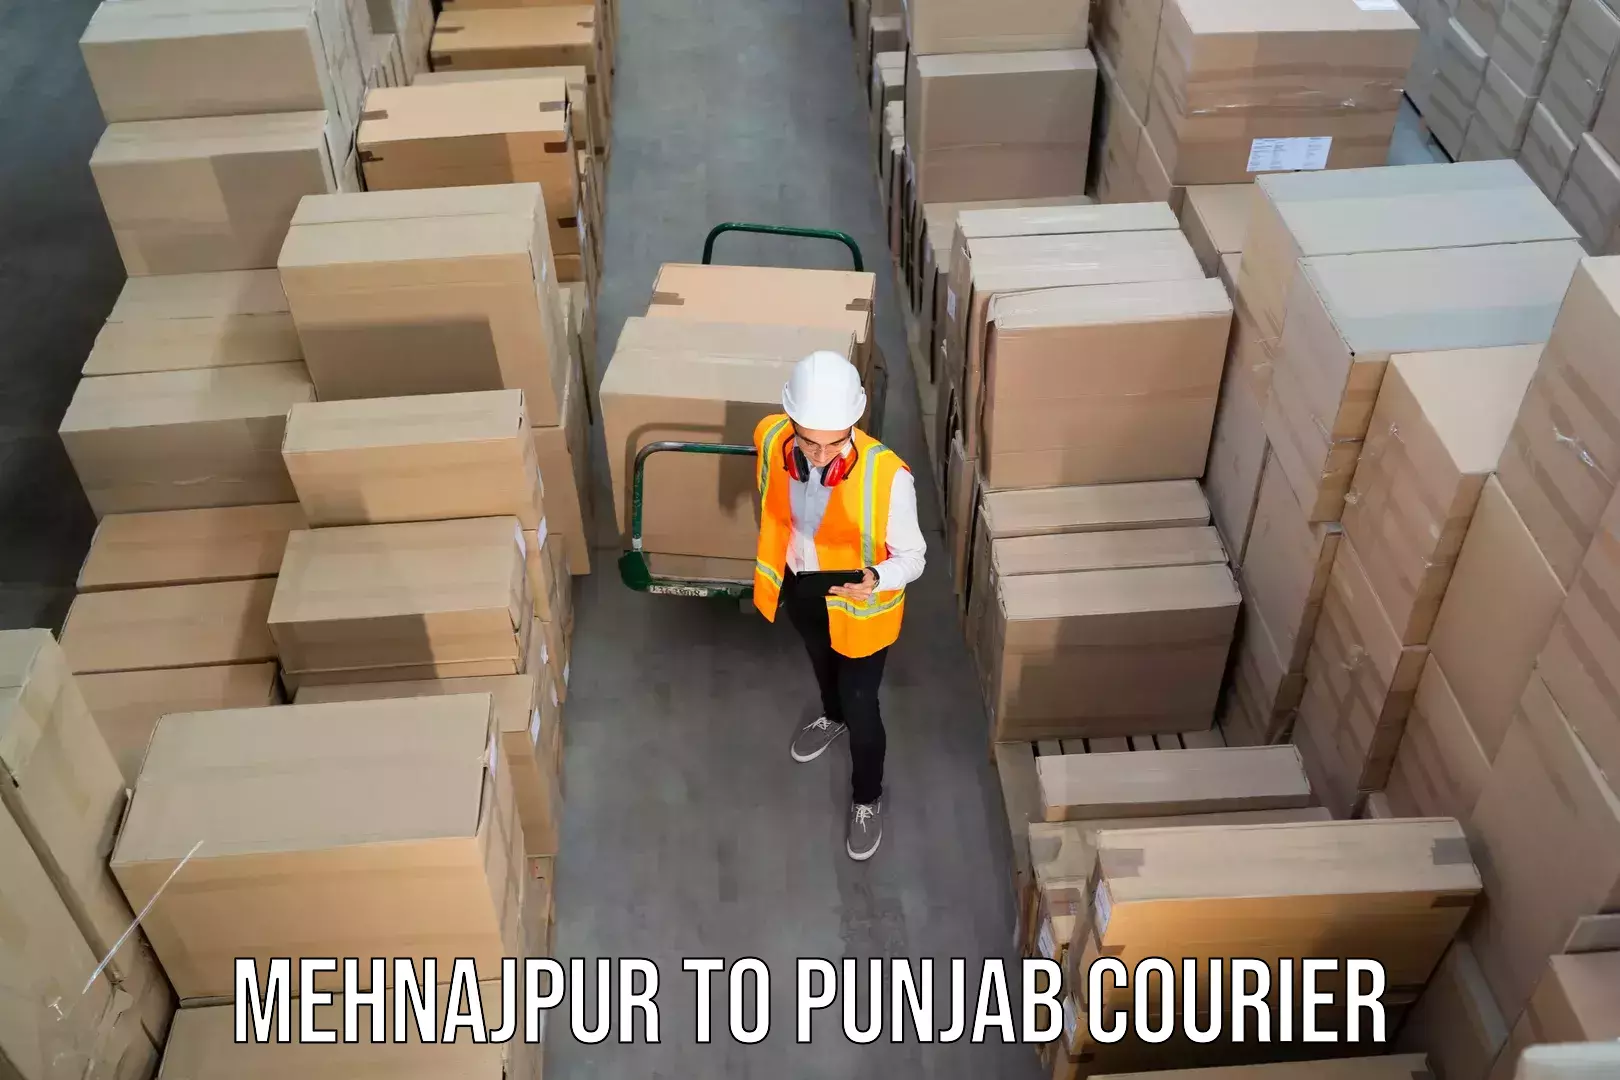 24/7 shipping services in Mehnajpur to Zirakpur